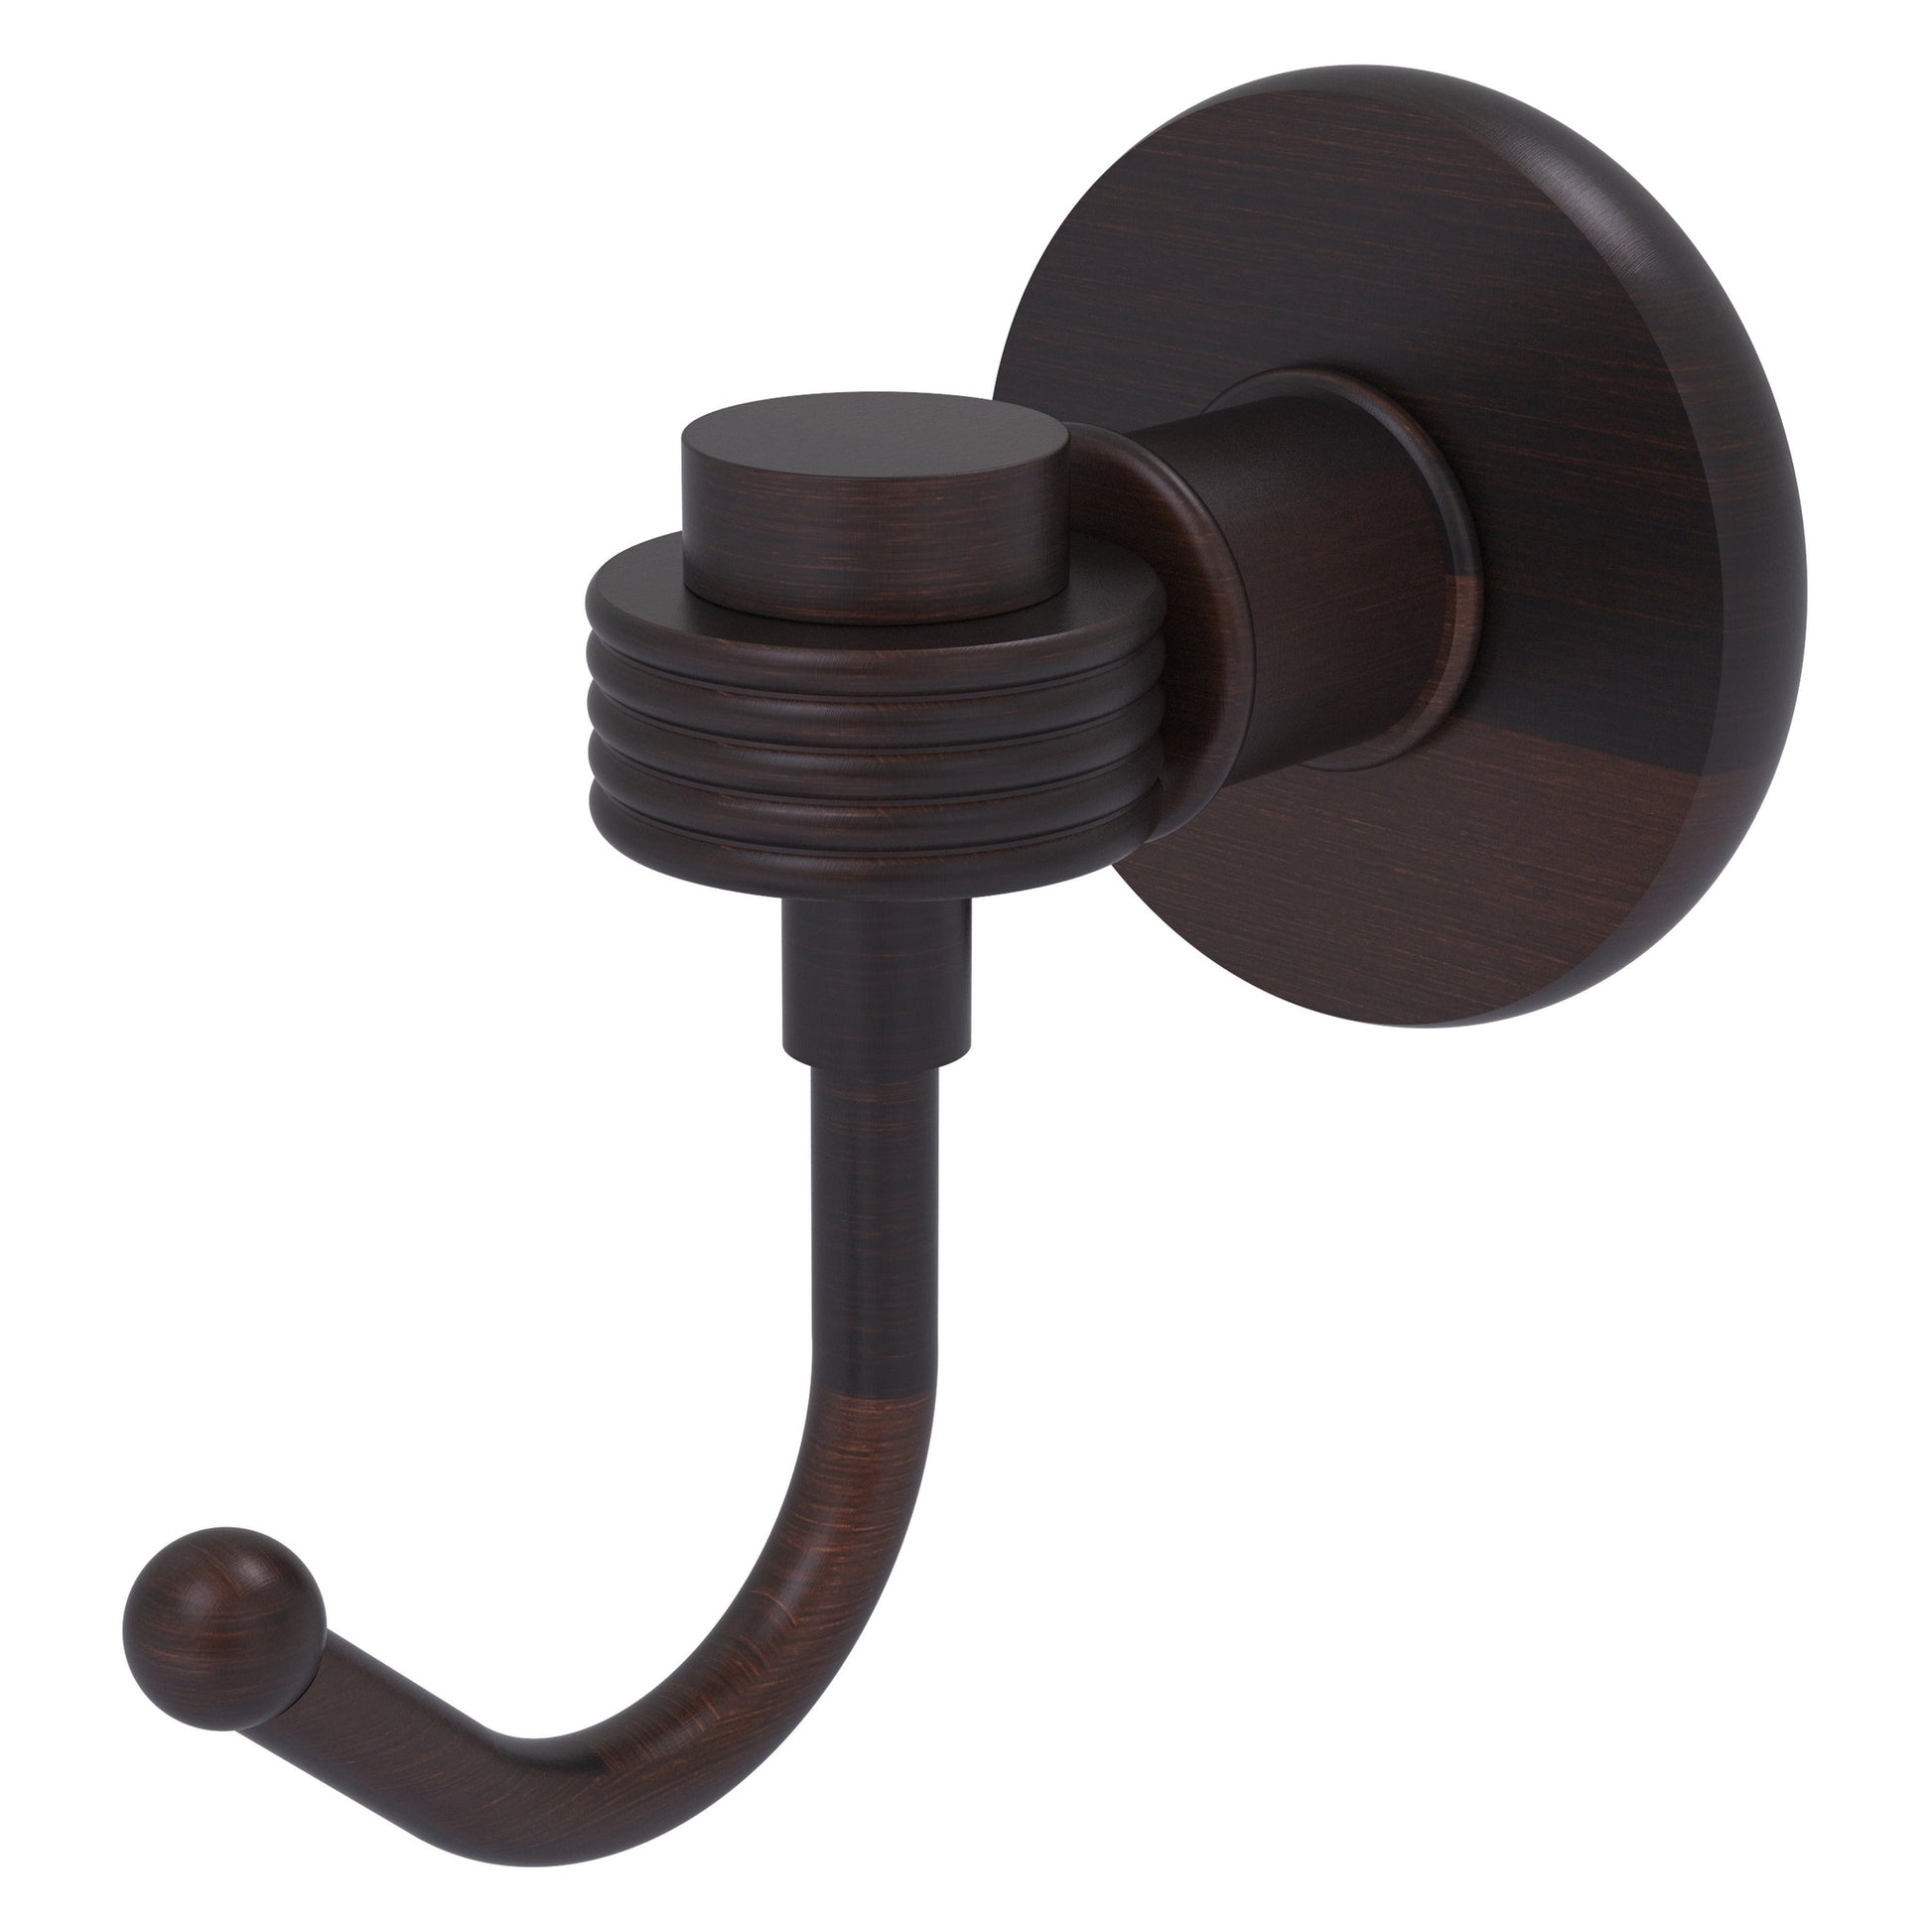 Allied Brass Skyline 2020G 2.8" x 4.77" Venetian Bronze Solid Brass Robe Hook With Grooved Accents